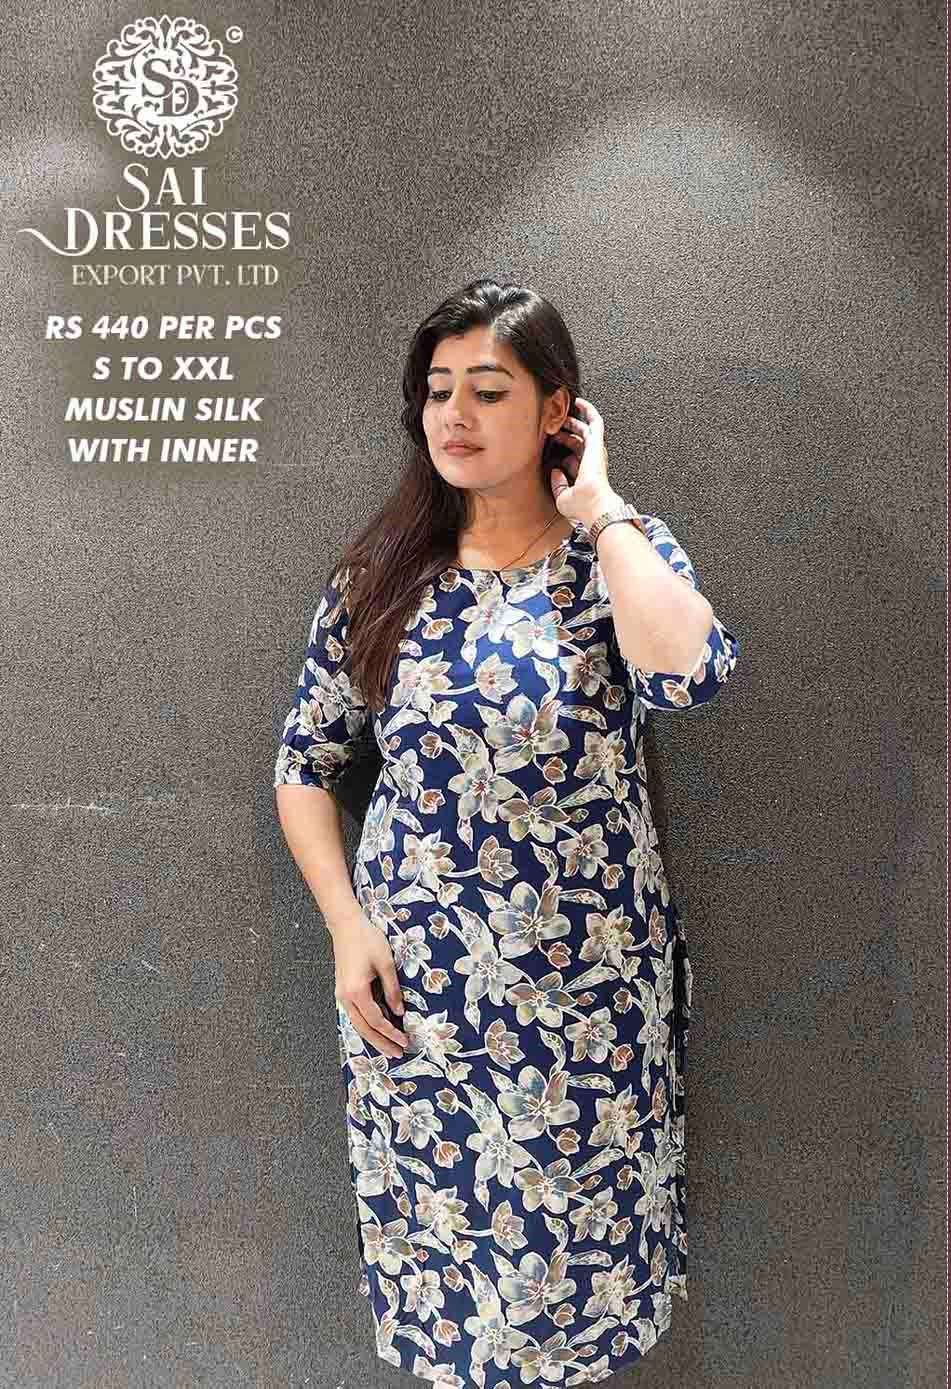 SAI DRESSES PRESENT D.NO SD49 READY TO WEAR DIGITAL PRINTED KURTI COMBO COLLECTION IN WHOLESALE RATE IN SURAT